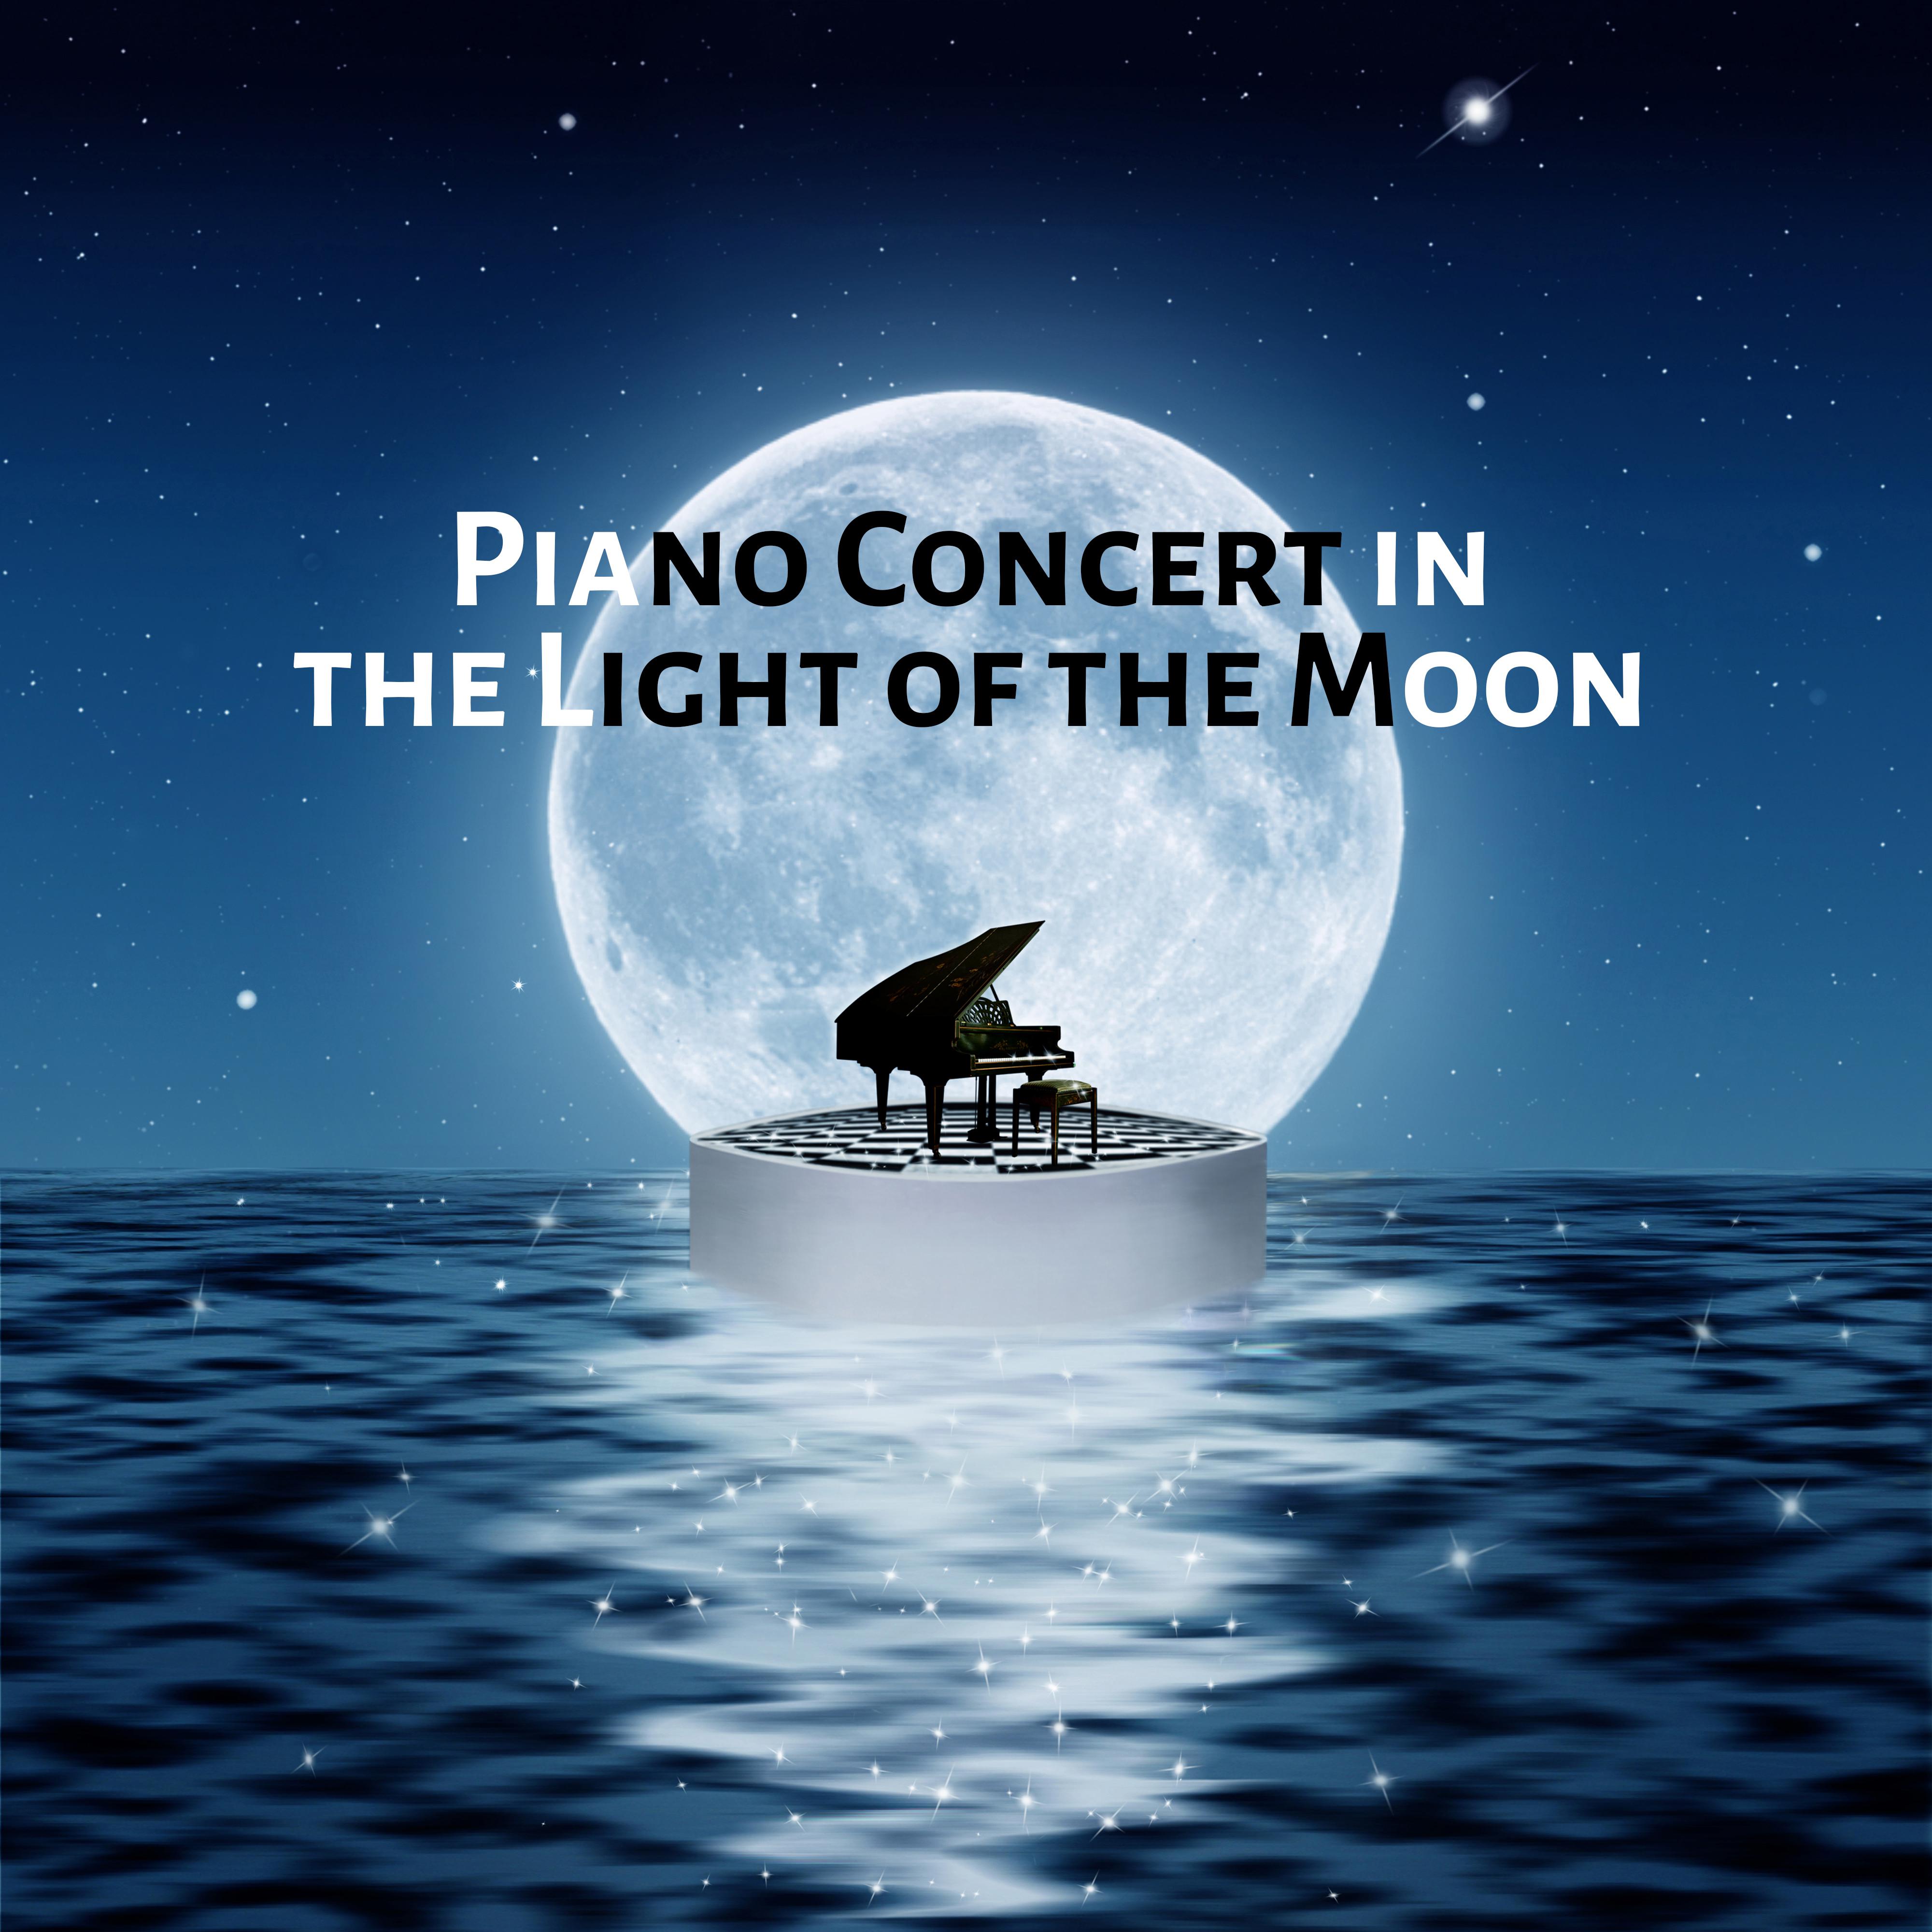 Piano Concert in the Light of the Moon: 2019 Instrumental Piano Jazz Most Beautiful Songs Compilation, Music for Romantic Dinner, Relaxation, Sleep or Cafe, Soothing Melodies